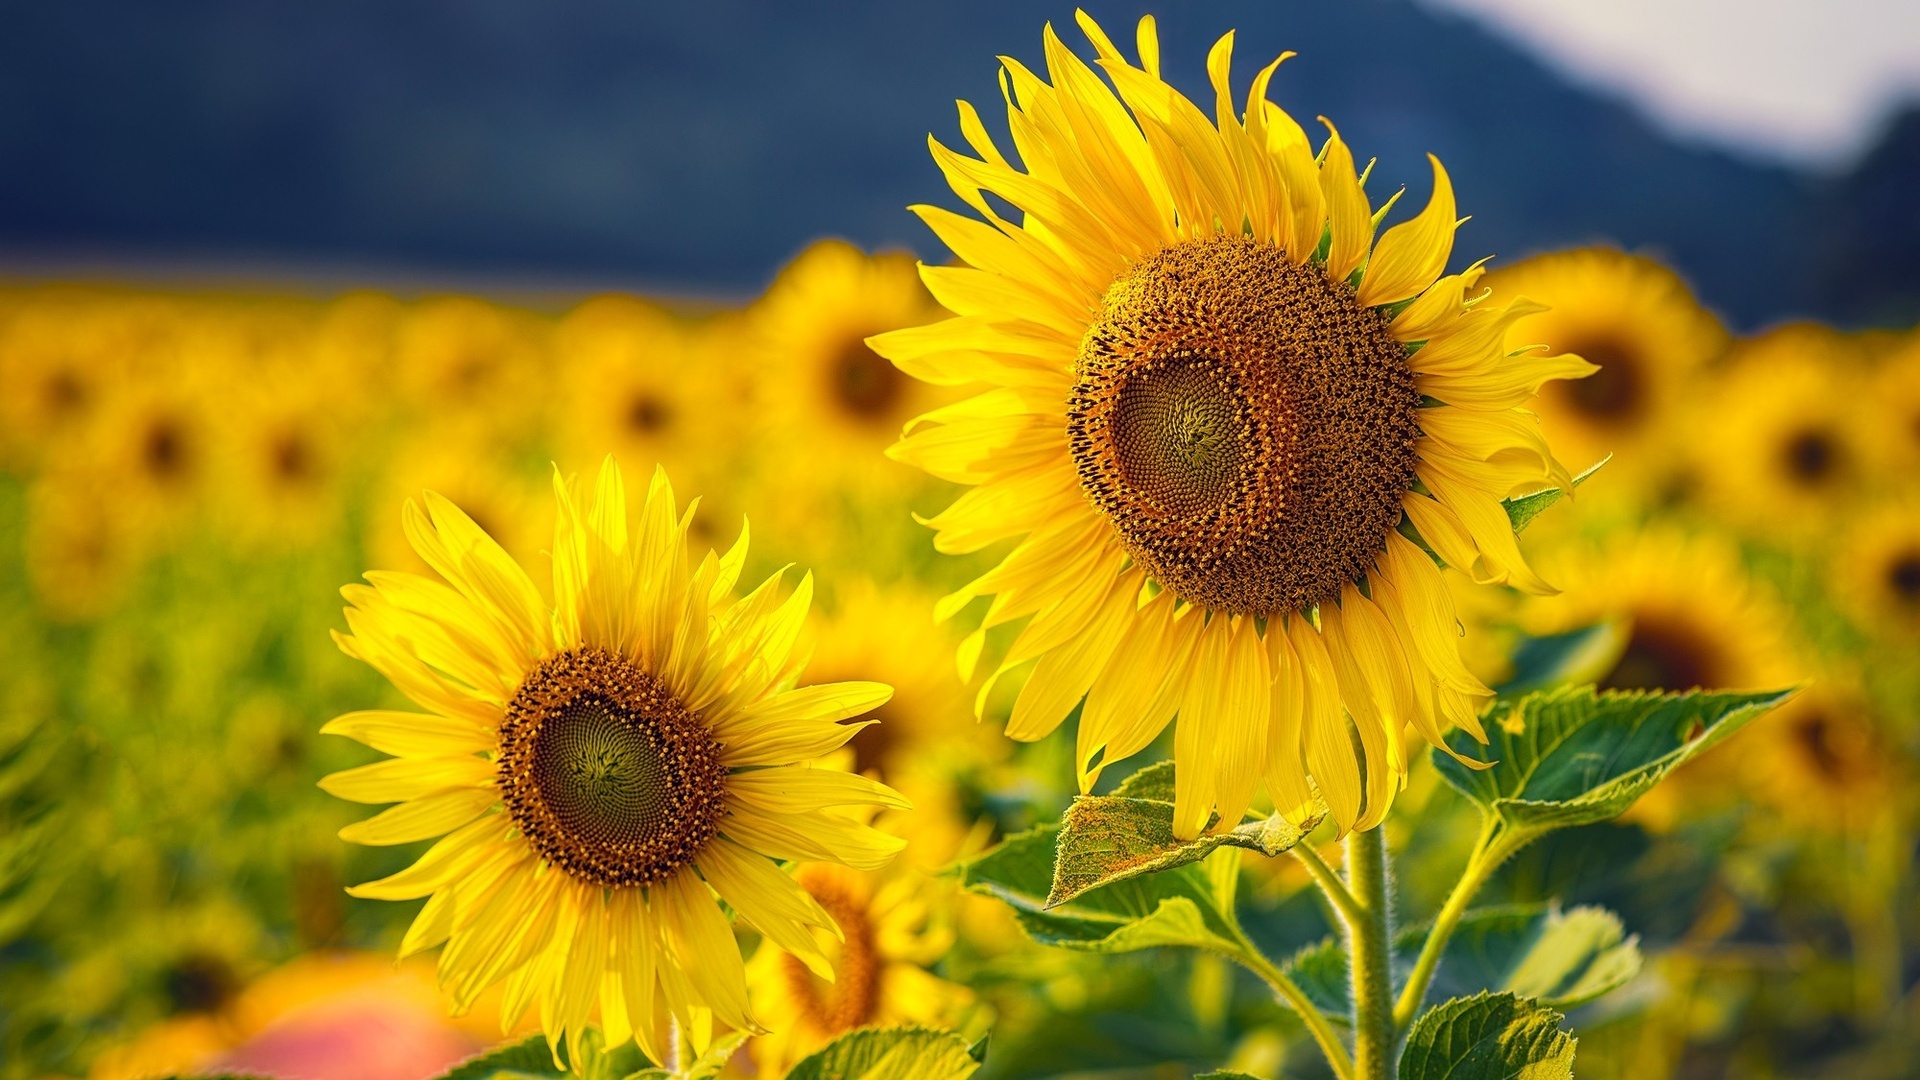 Sunflower Field Wallpaper Related Keywords Suggestions